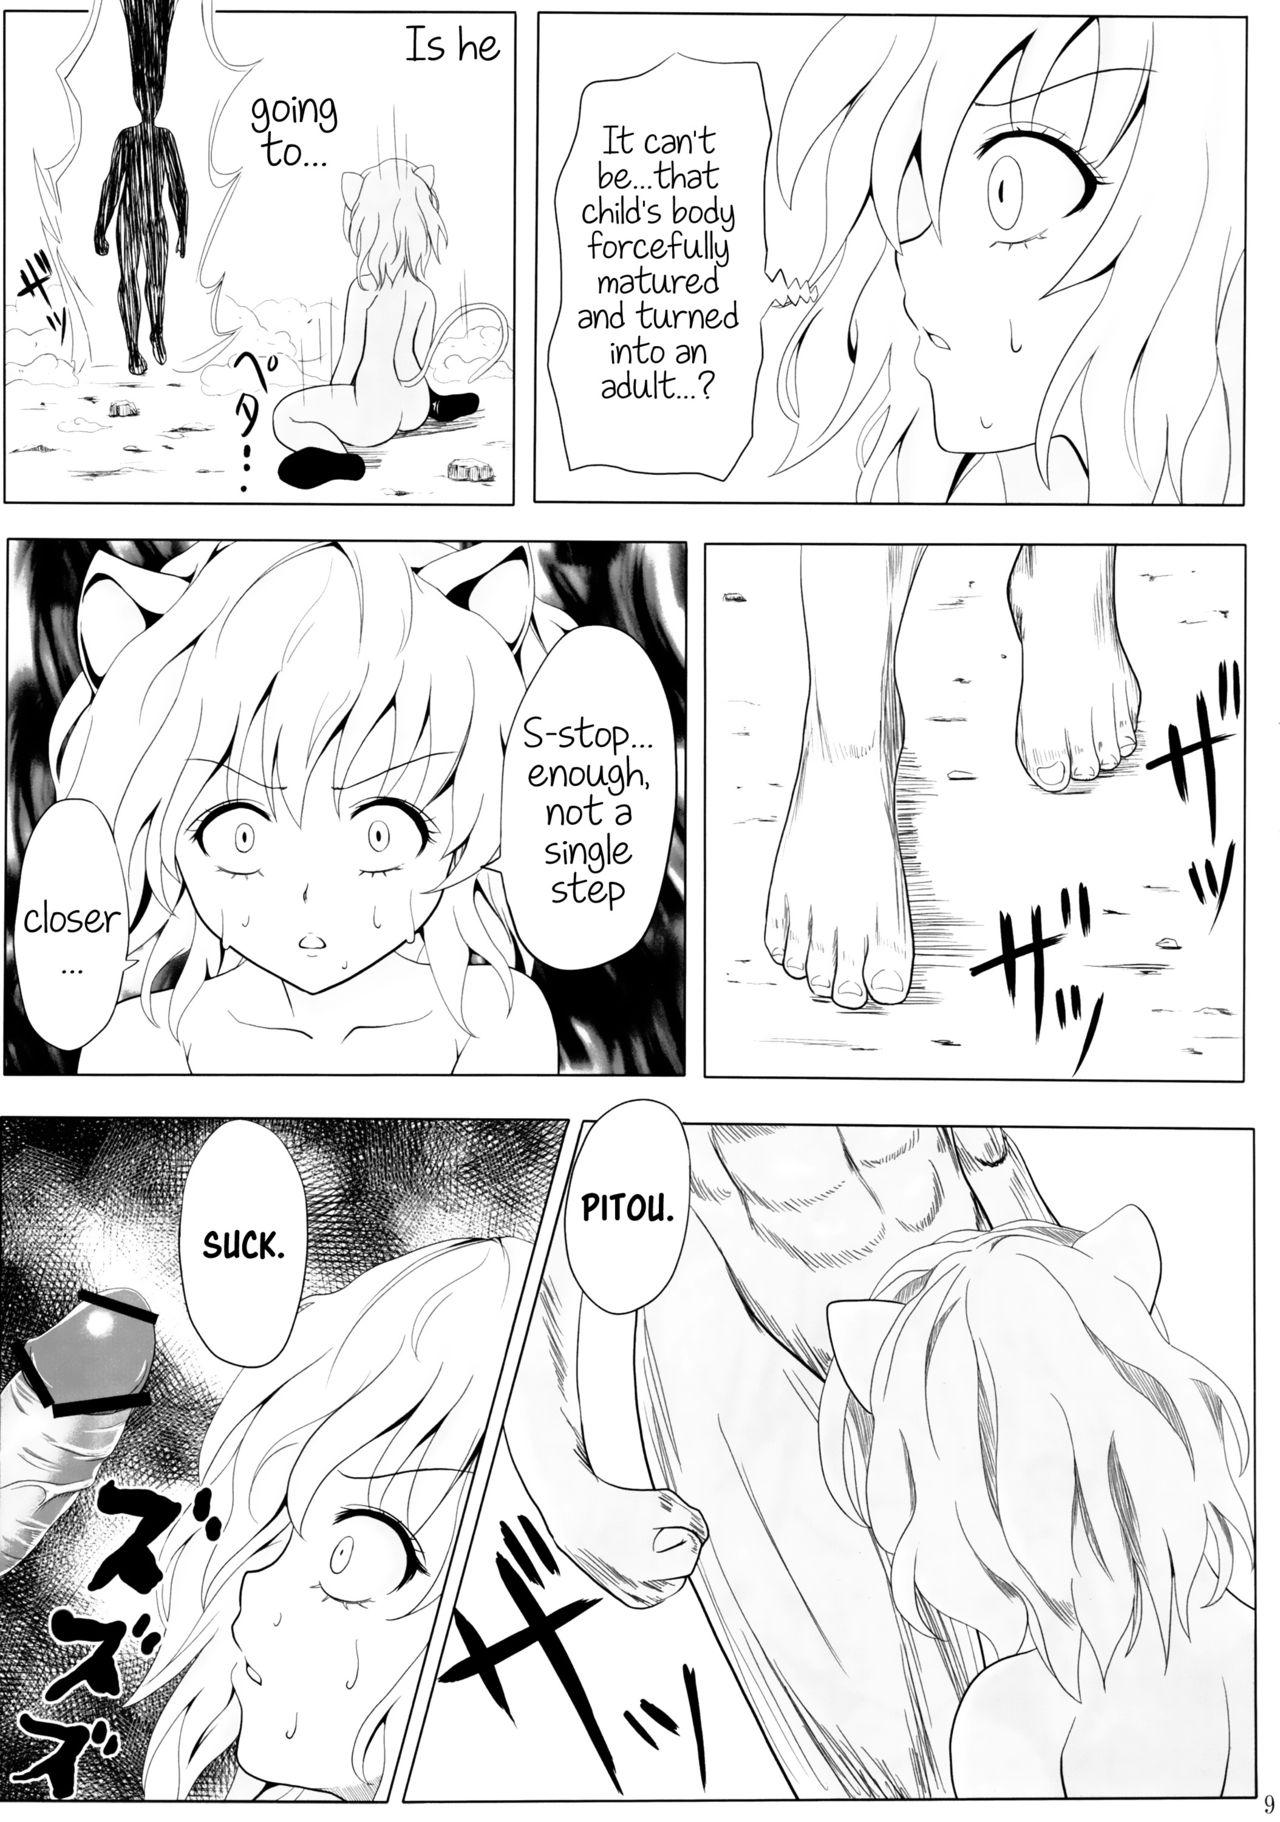 Submission Pitou x Hunter - Hunter x hunter Picked Up - Page 8